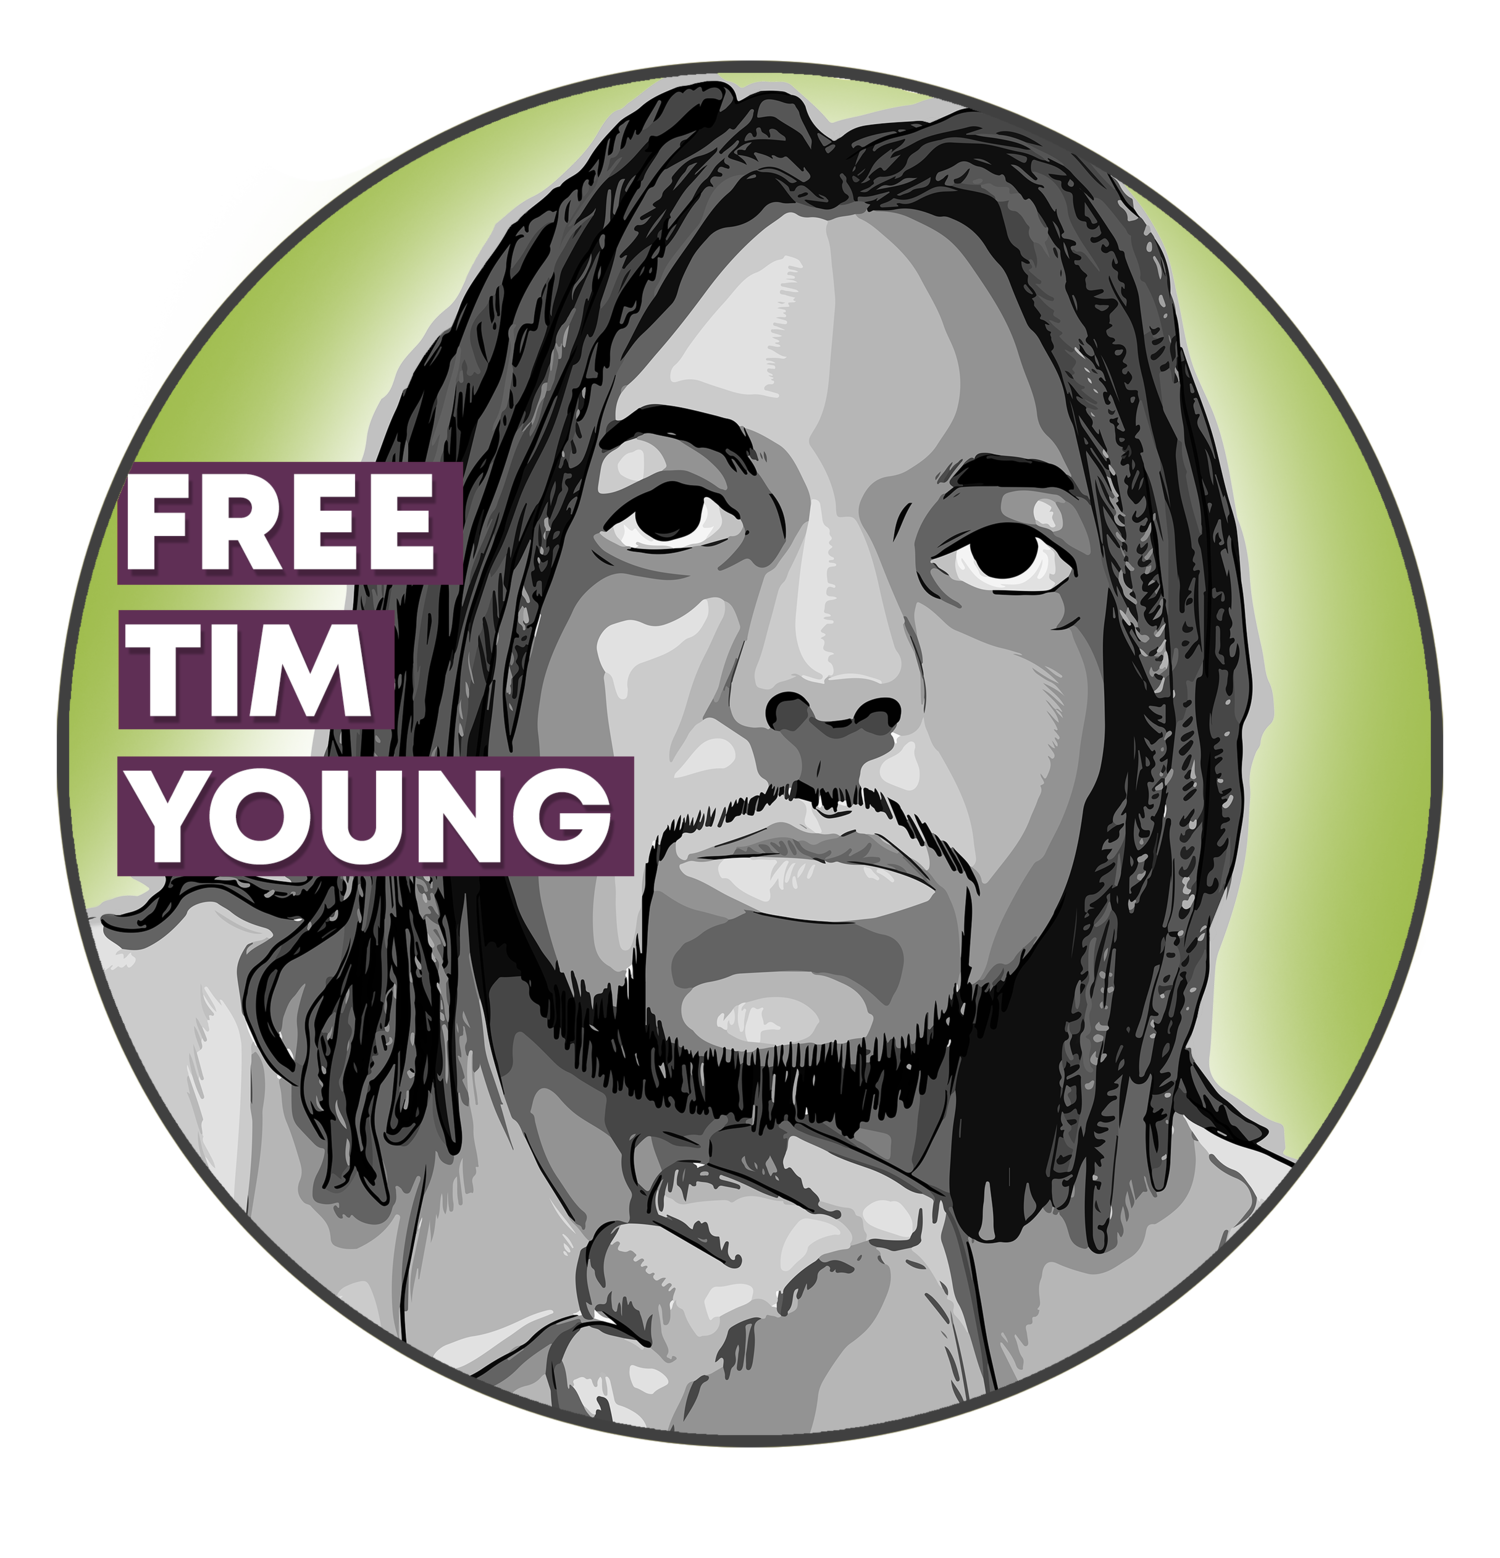 Free Tim Young 